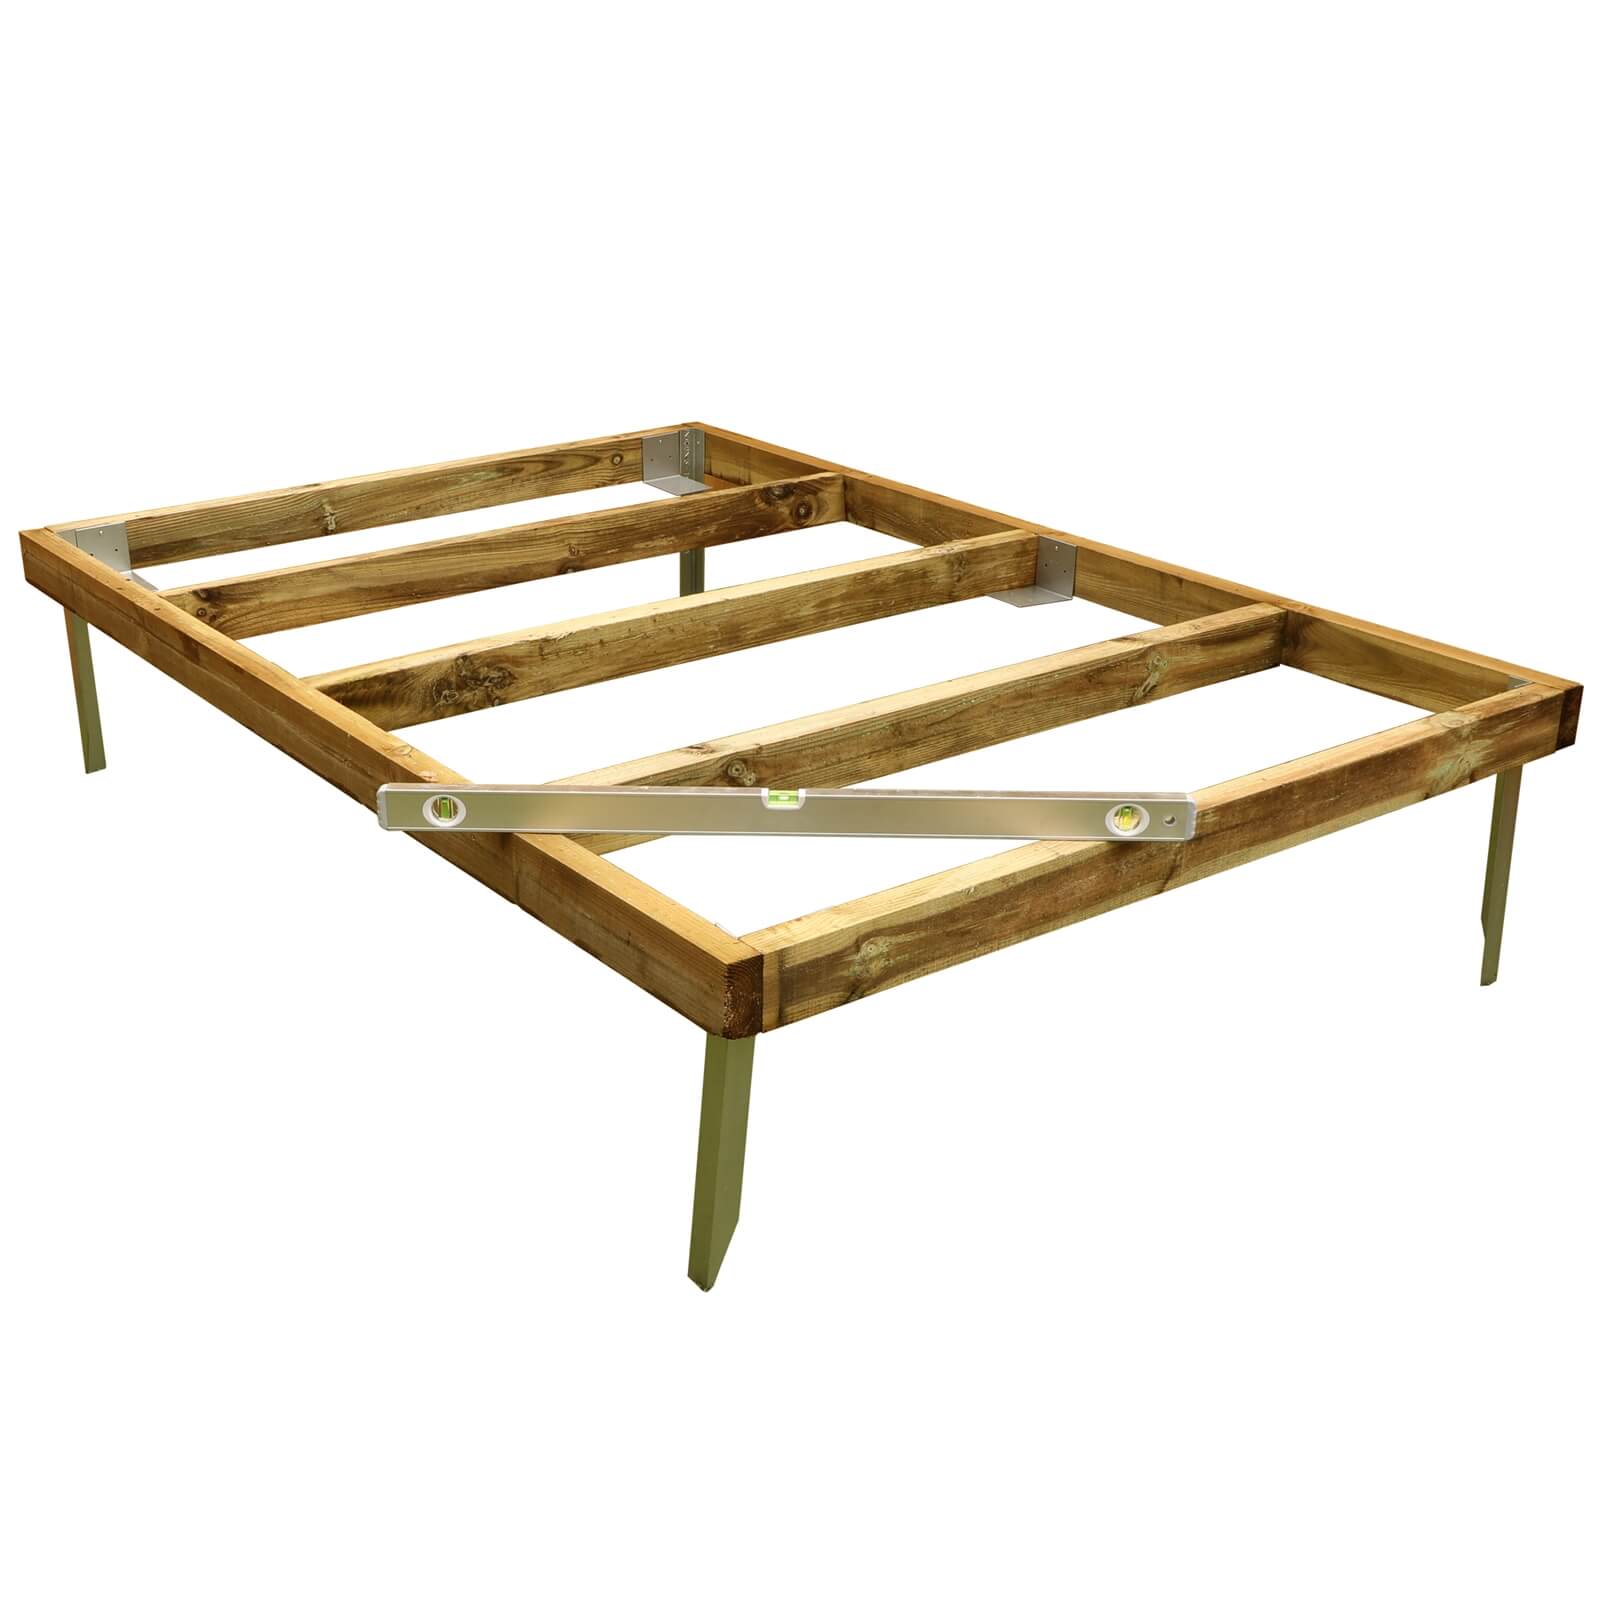 Photo of Mercia 7x5ft Pressure Treated Wooden Shed Base